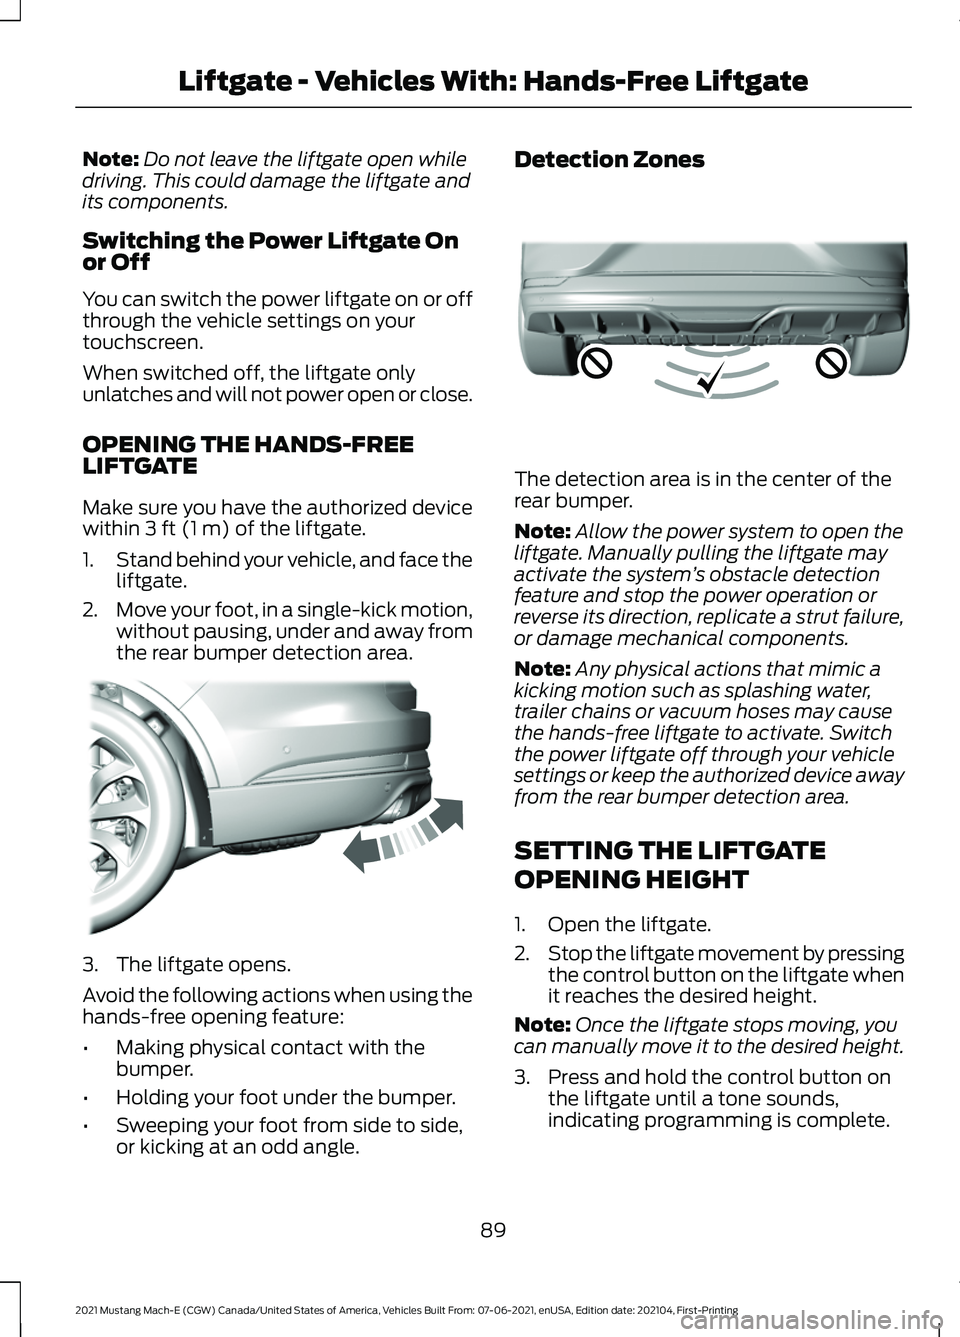 FORD MUSTANG MACH-E 2021  Owners Manual Note:
Do not leave the liftgate open while
driving. This could damage the liftgate and
its components.
Switching the Power Liftgate On
or Off
You can switch the power liftgate on or off
through the ve